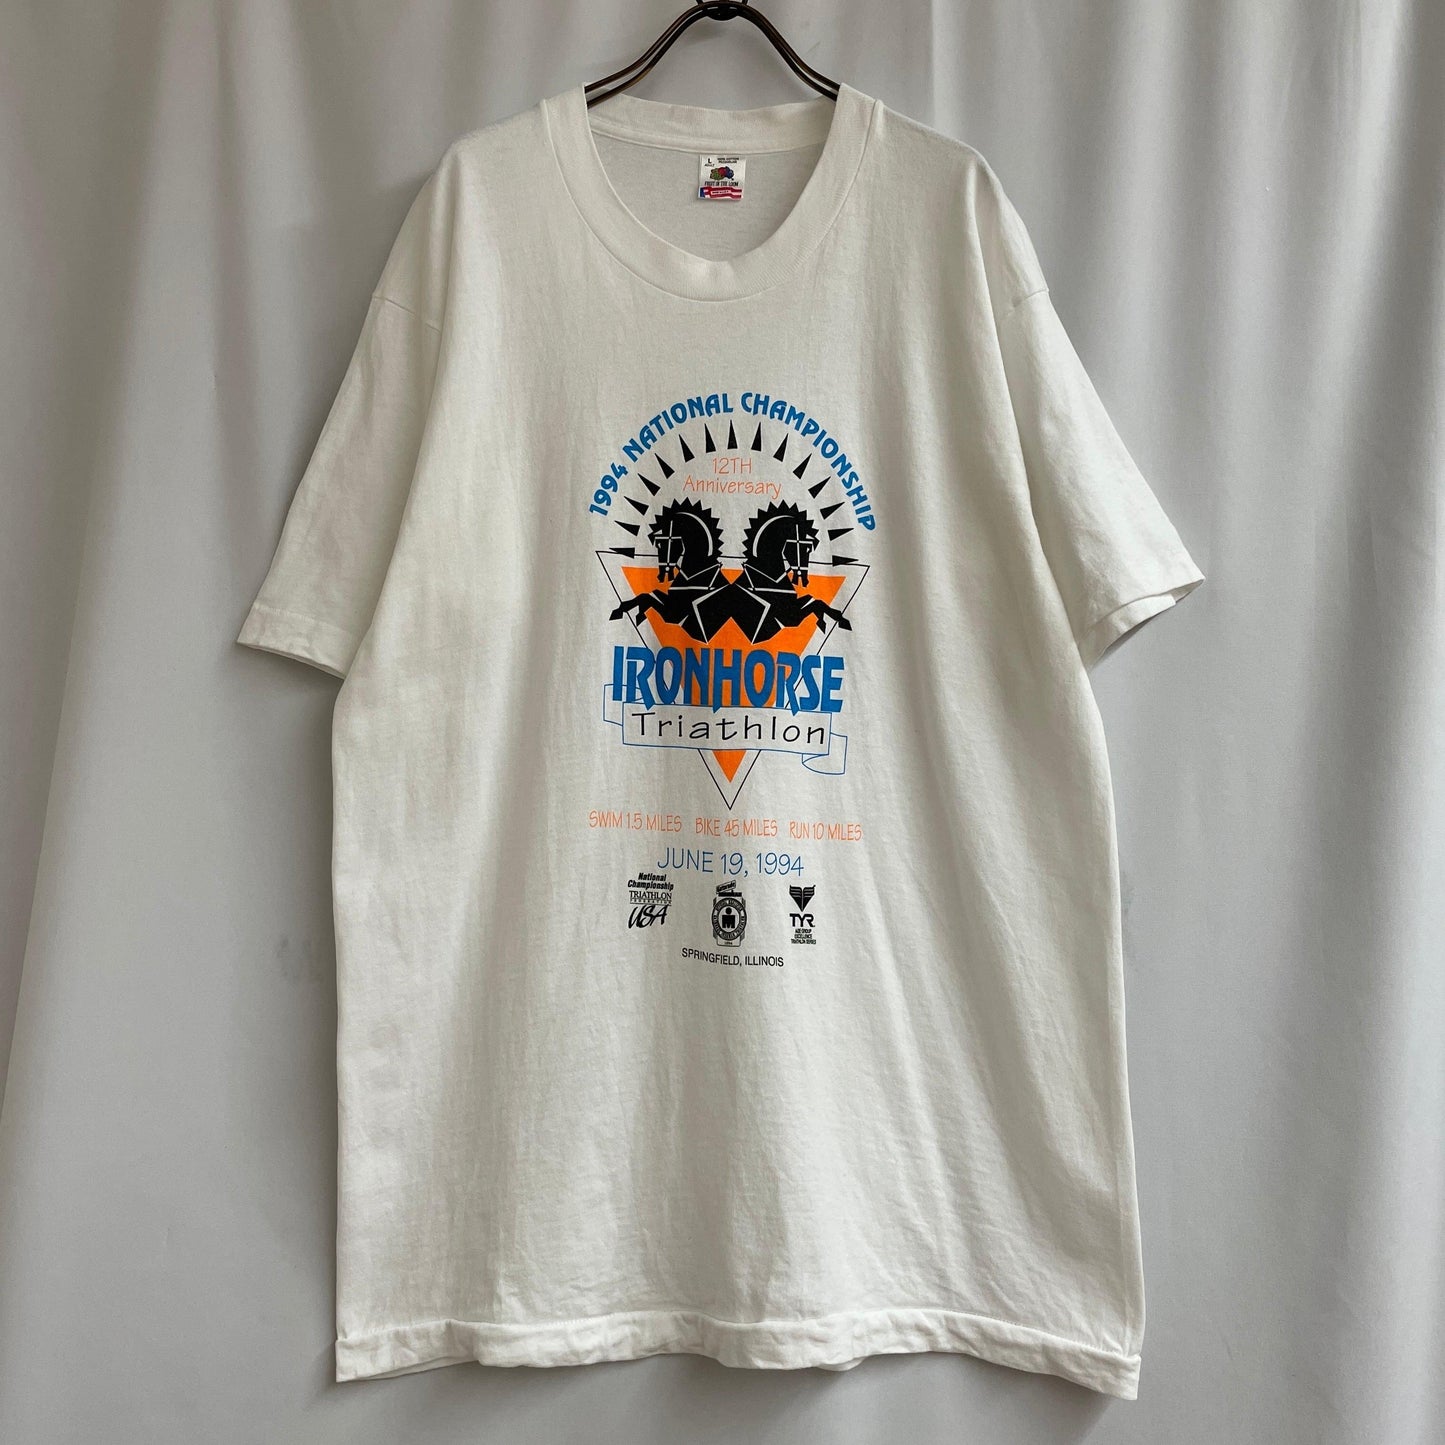 90?80s vintage Tee T-shirt made in USA